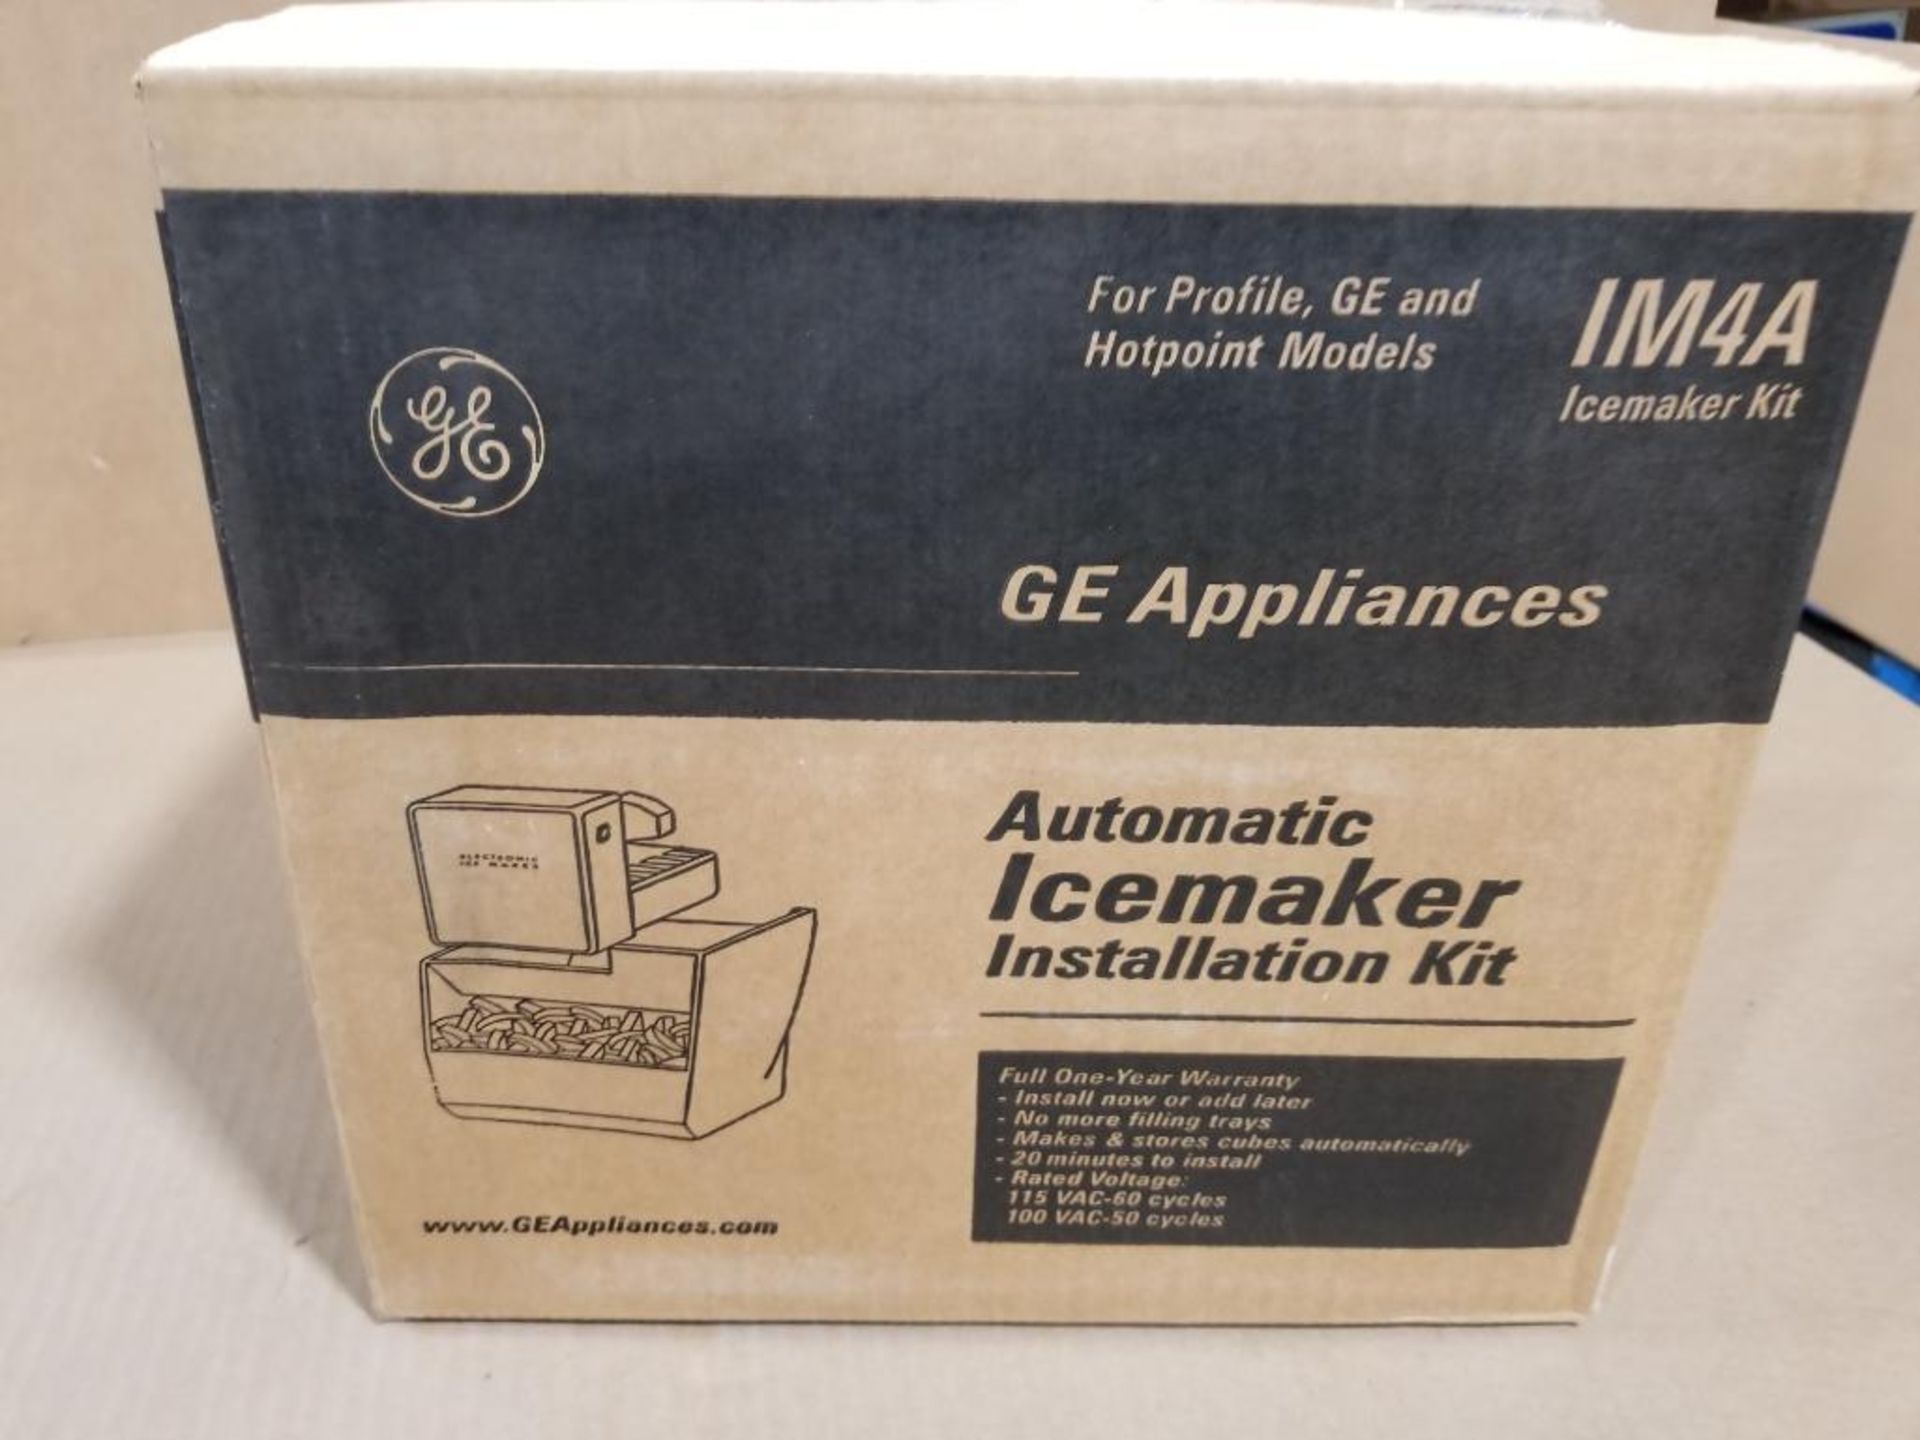 GE automatic icemaker installation kit. Model IM4A. - Image 4 of 5